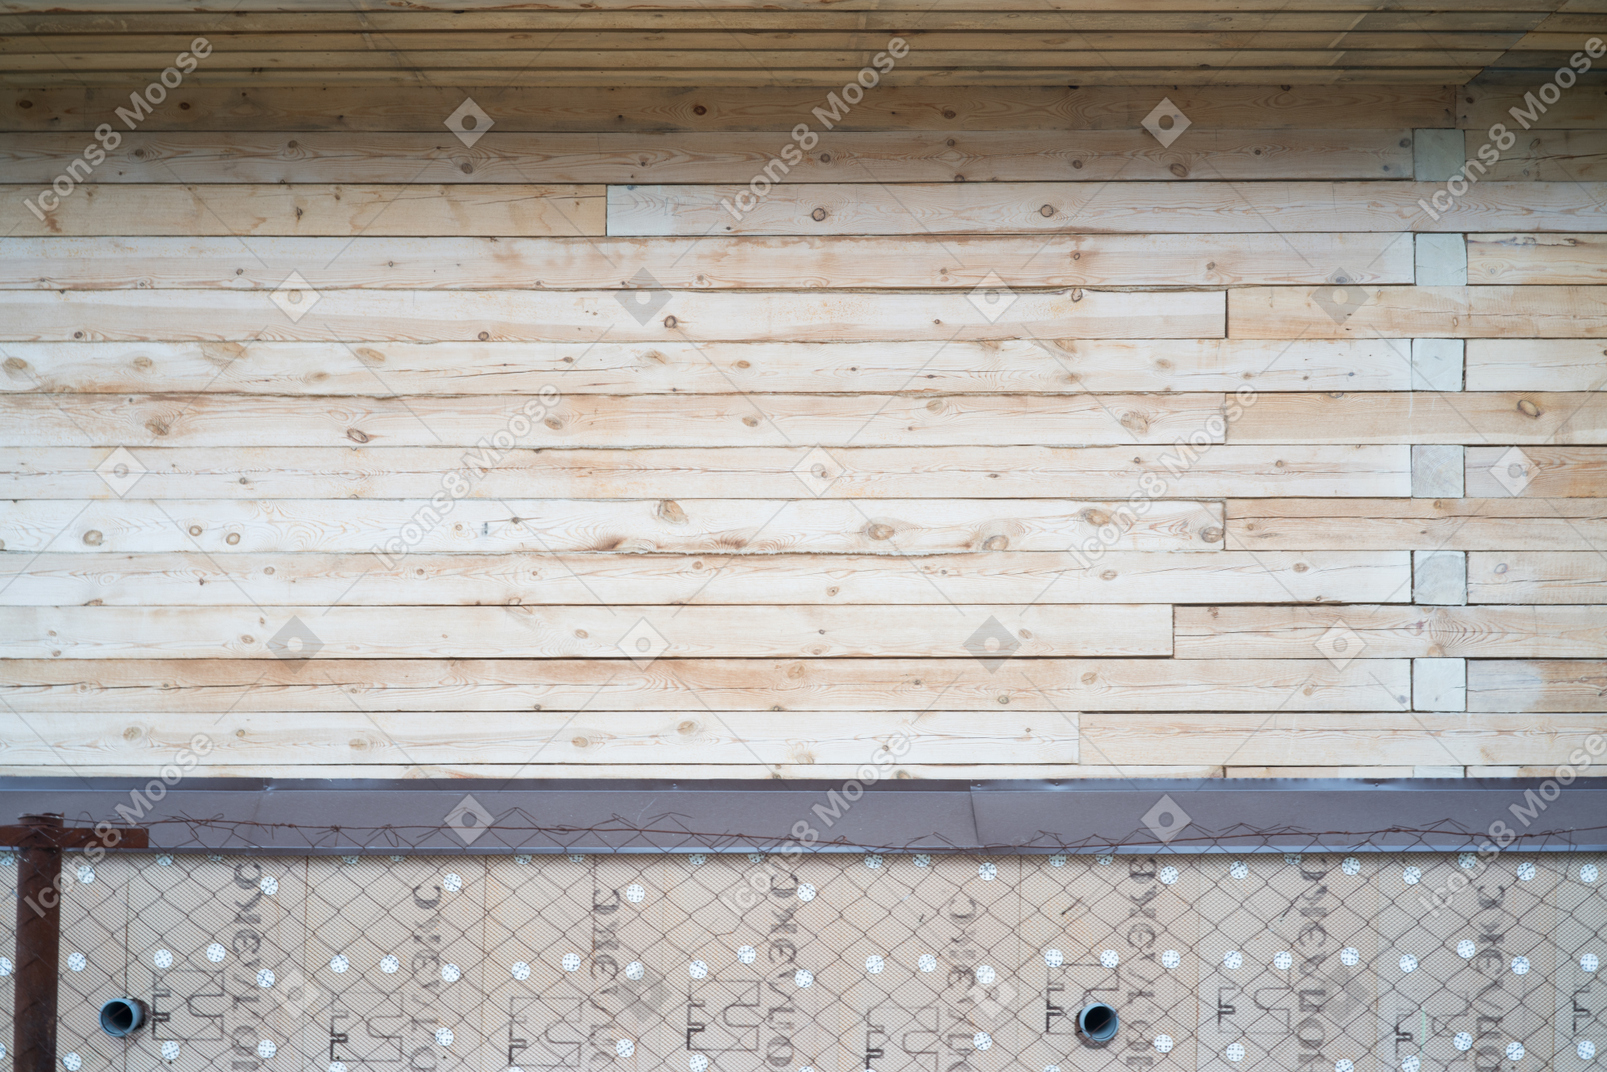 Wooden material